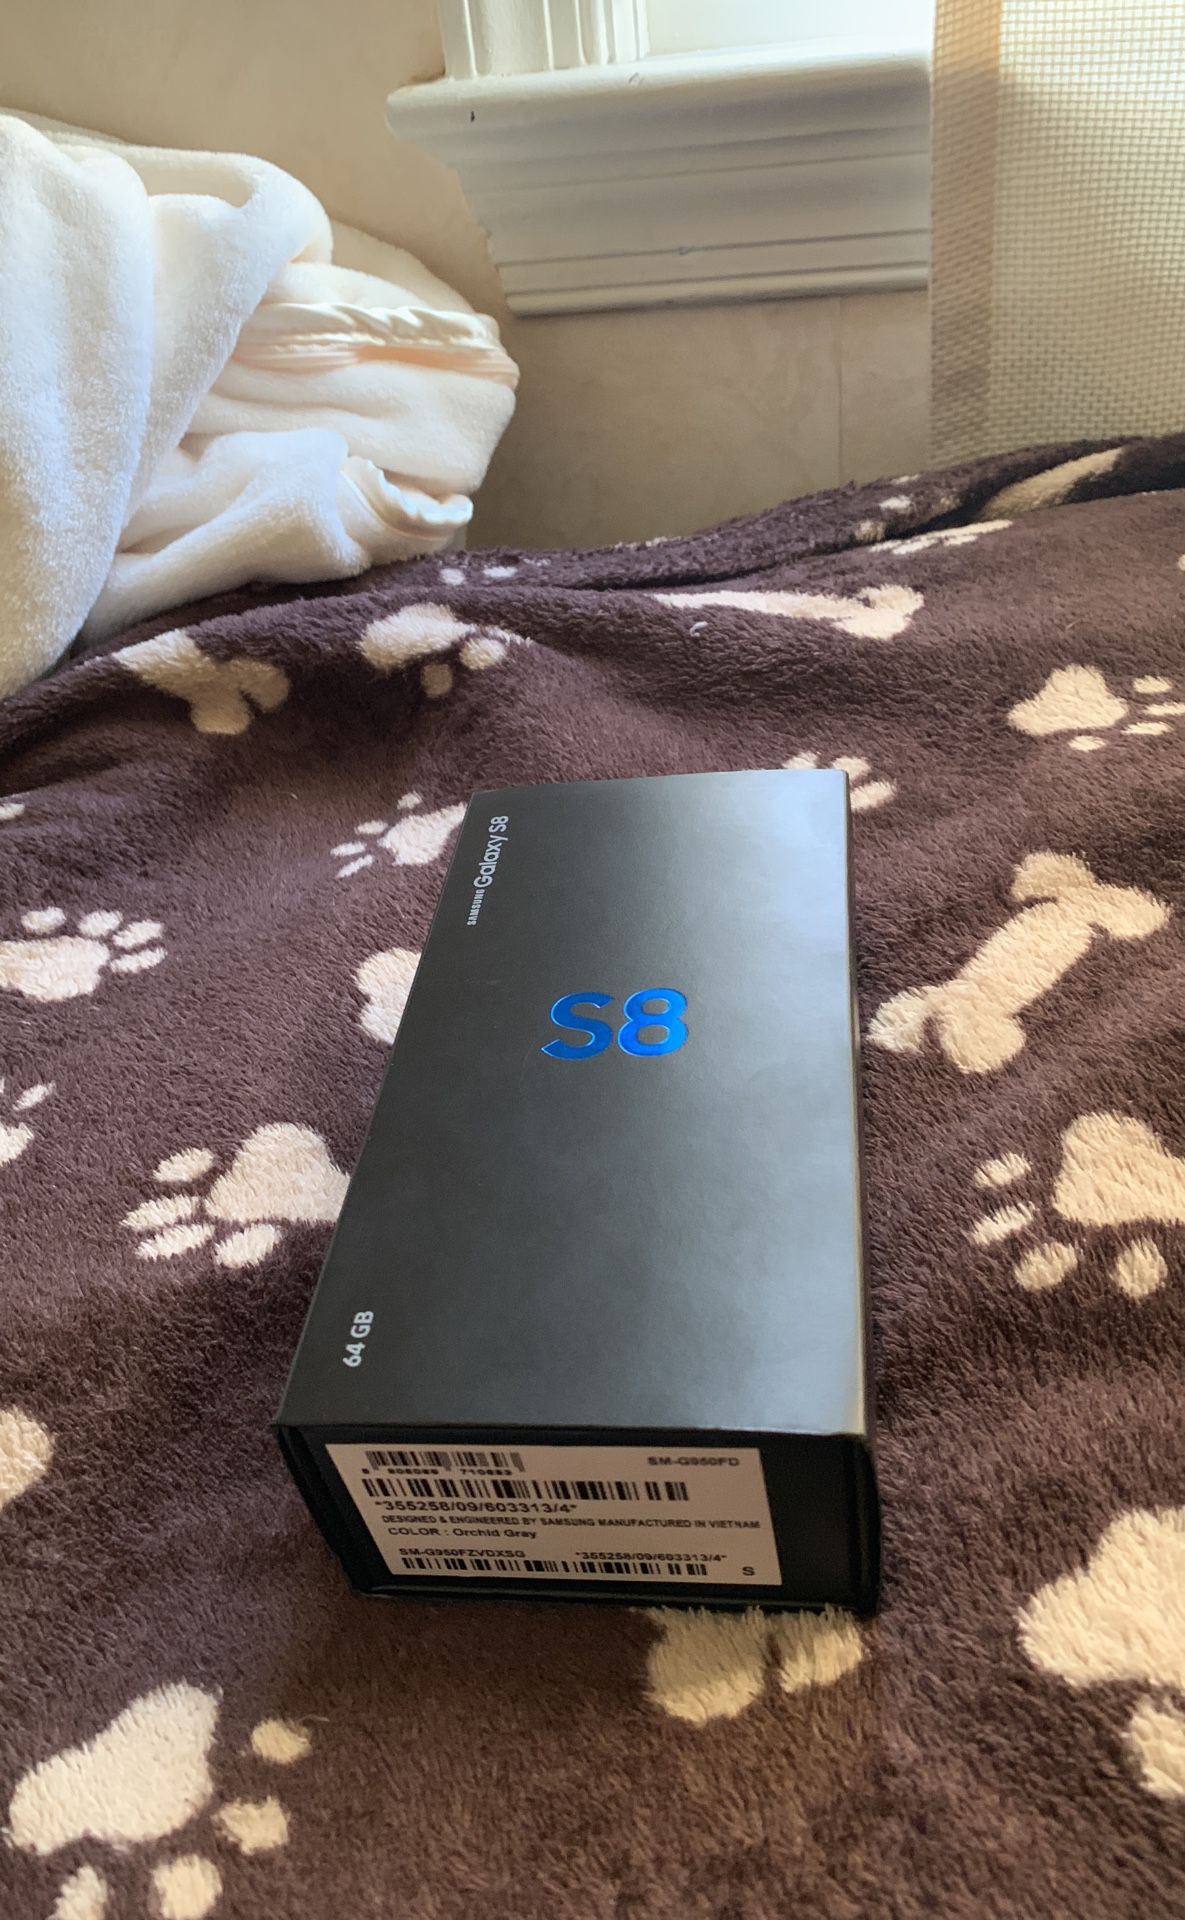 Brand new Samsung Galaxy S8 (case included)